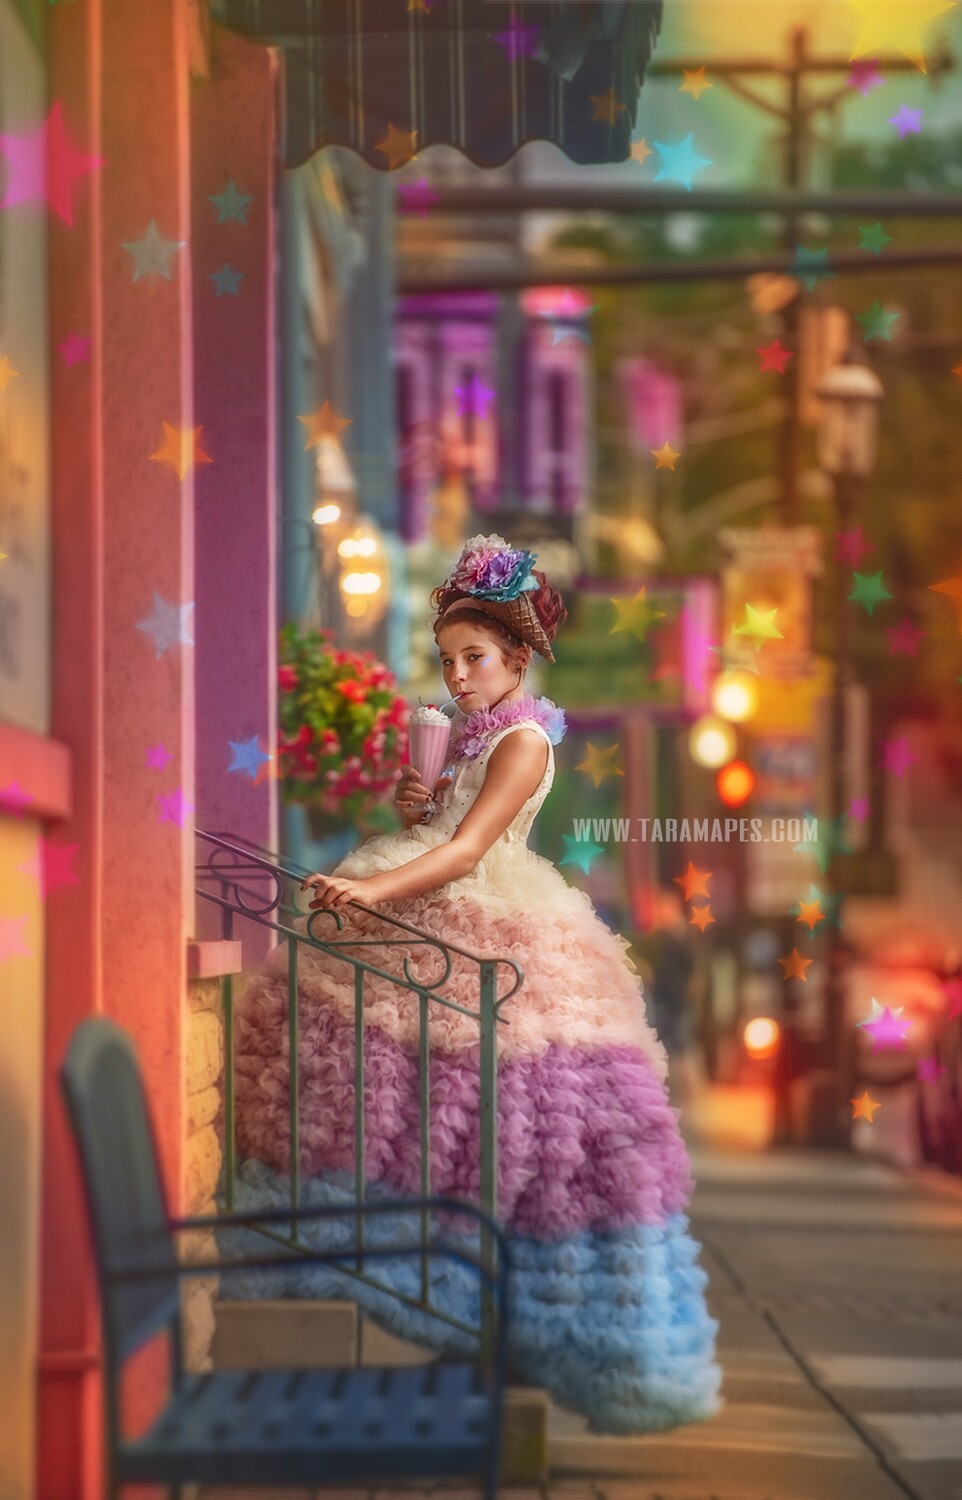 Ice Cream City - Colorful Street Stairs in 50s City Digital Background Backdrop - Paint the City - Star Overlay Included - City Theater Street stairs for Portraits Digital Background